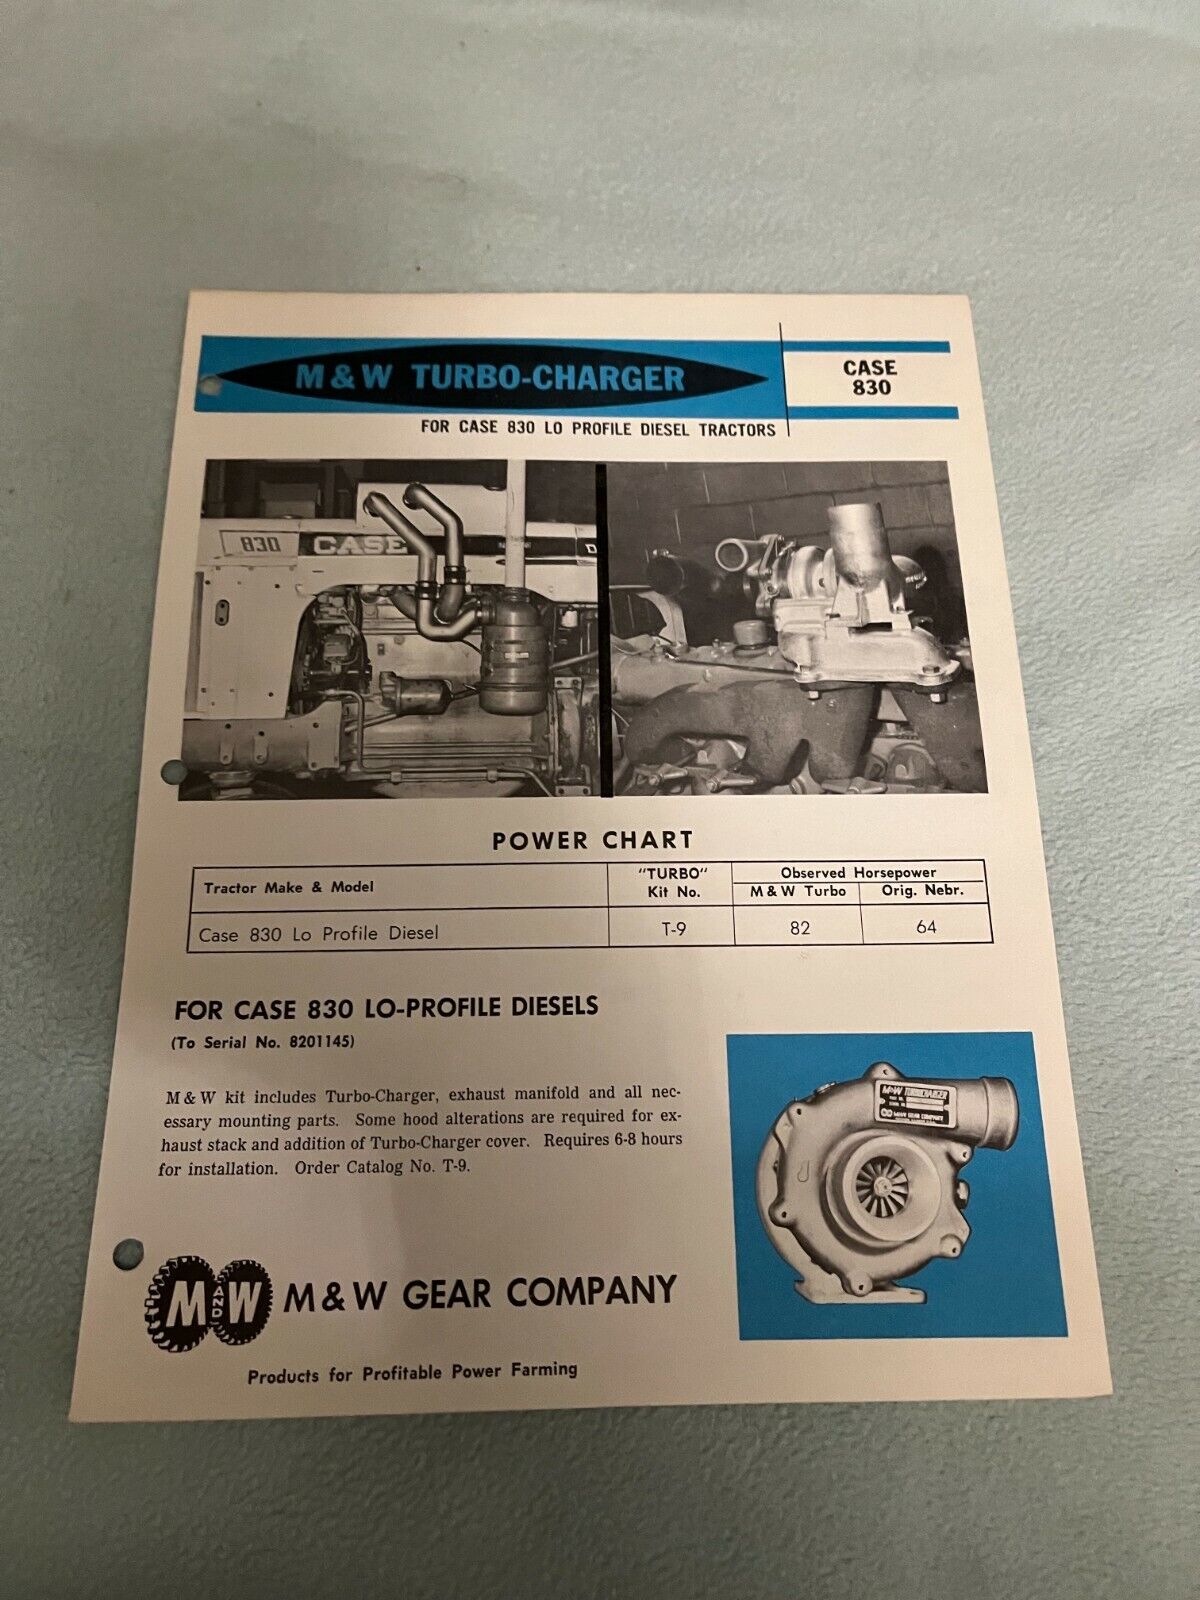 M&W Turbo Charger for Case 830 Tractor Brochure FCCA 